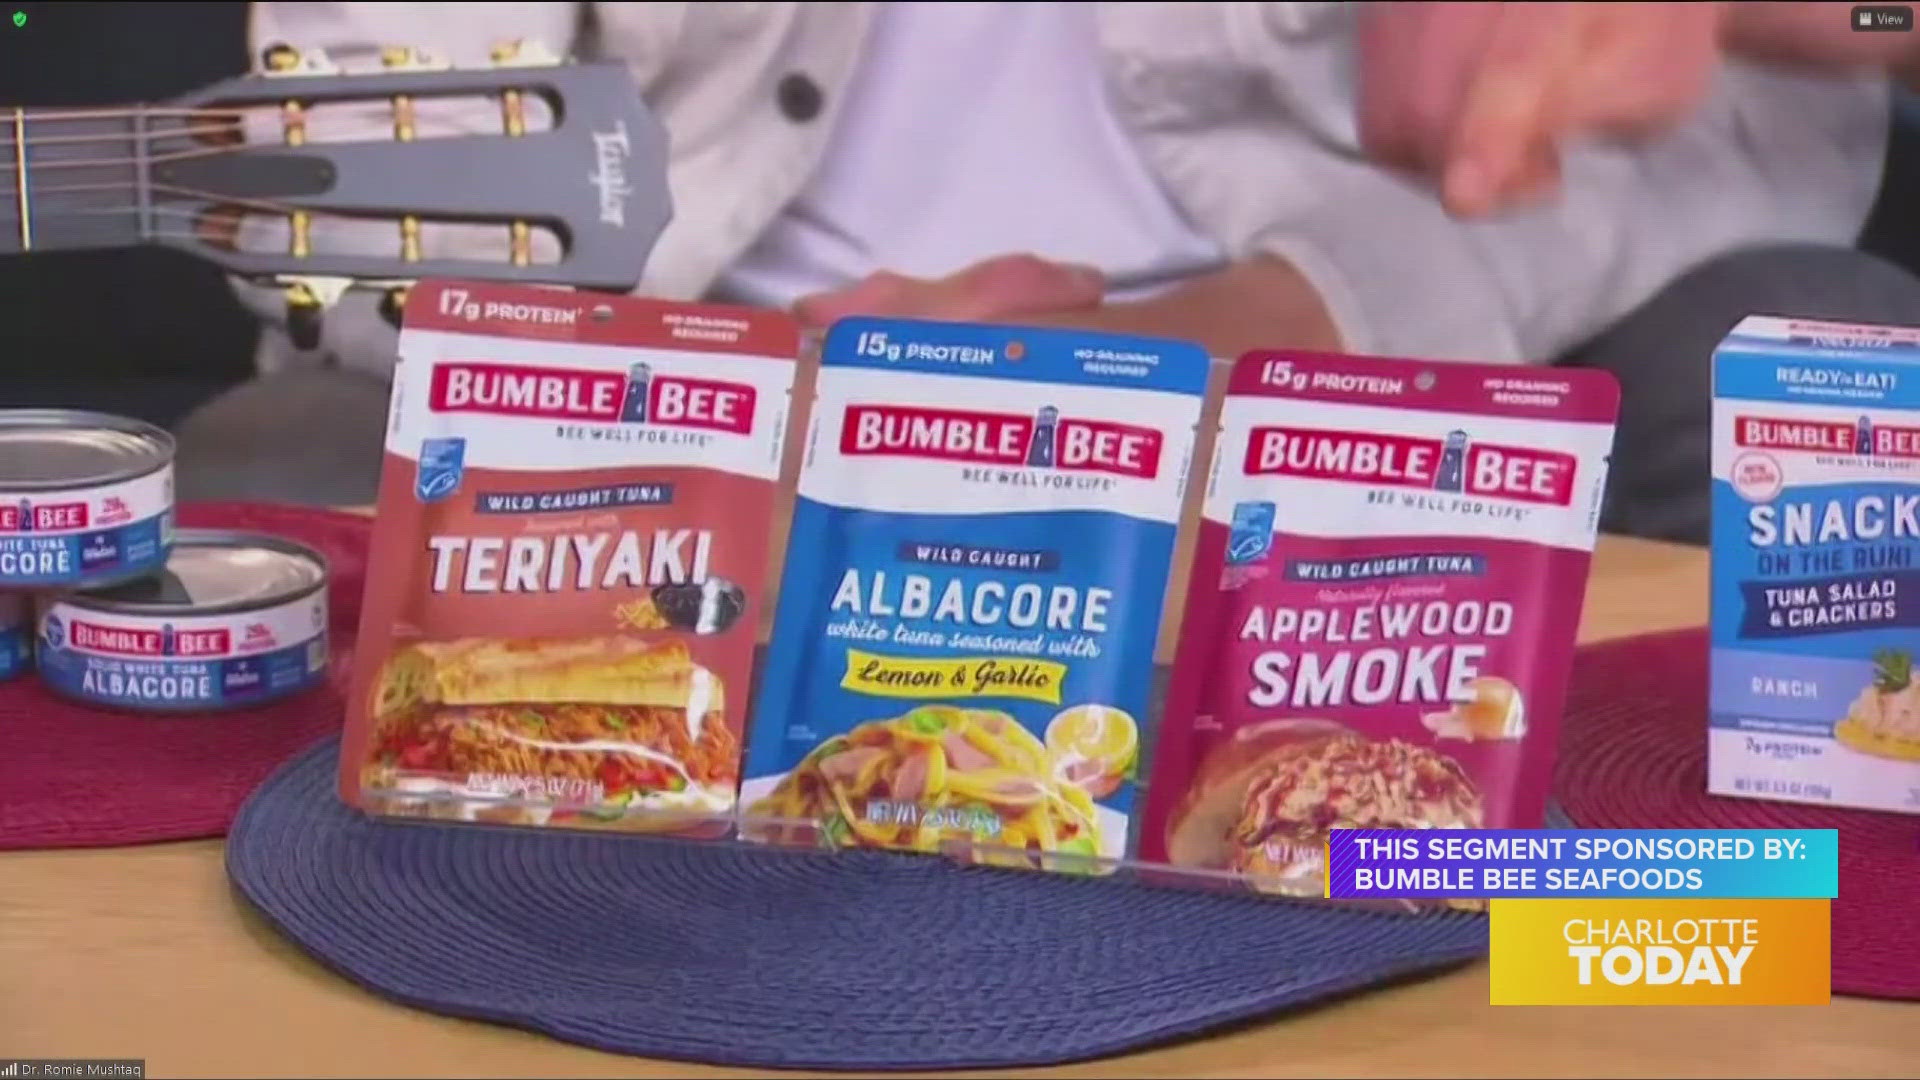 BBMAK shares tips for Smart Snacking